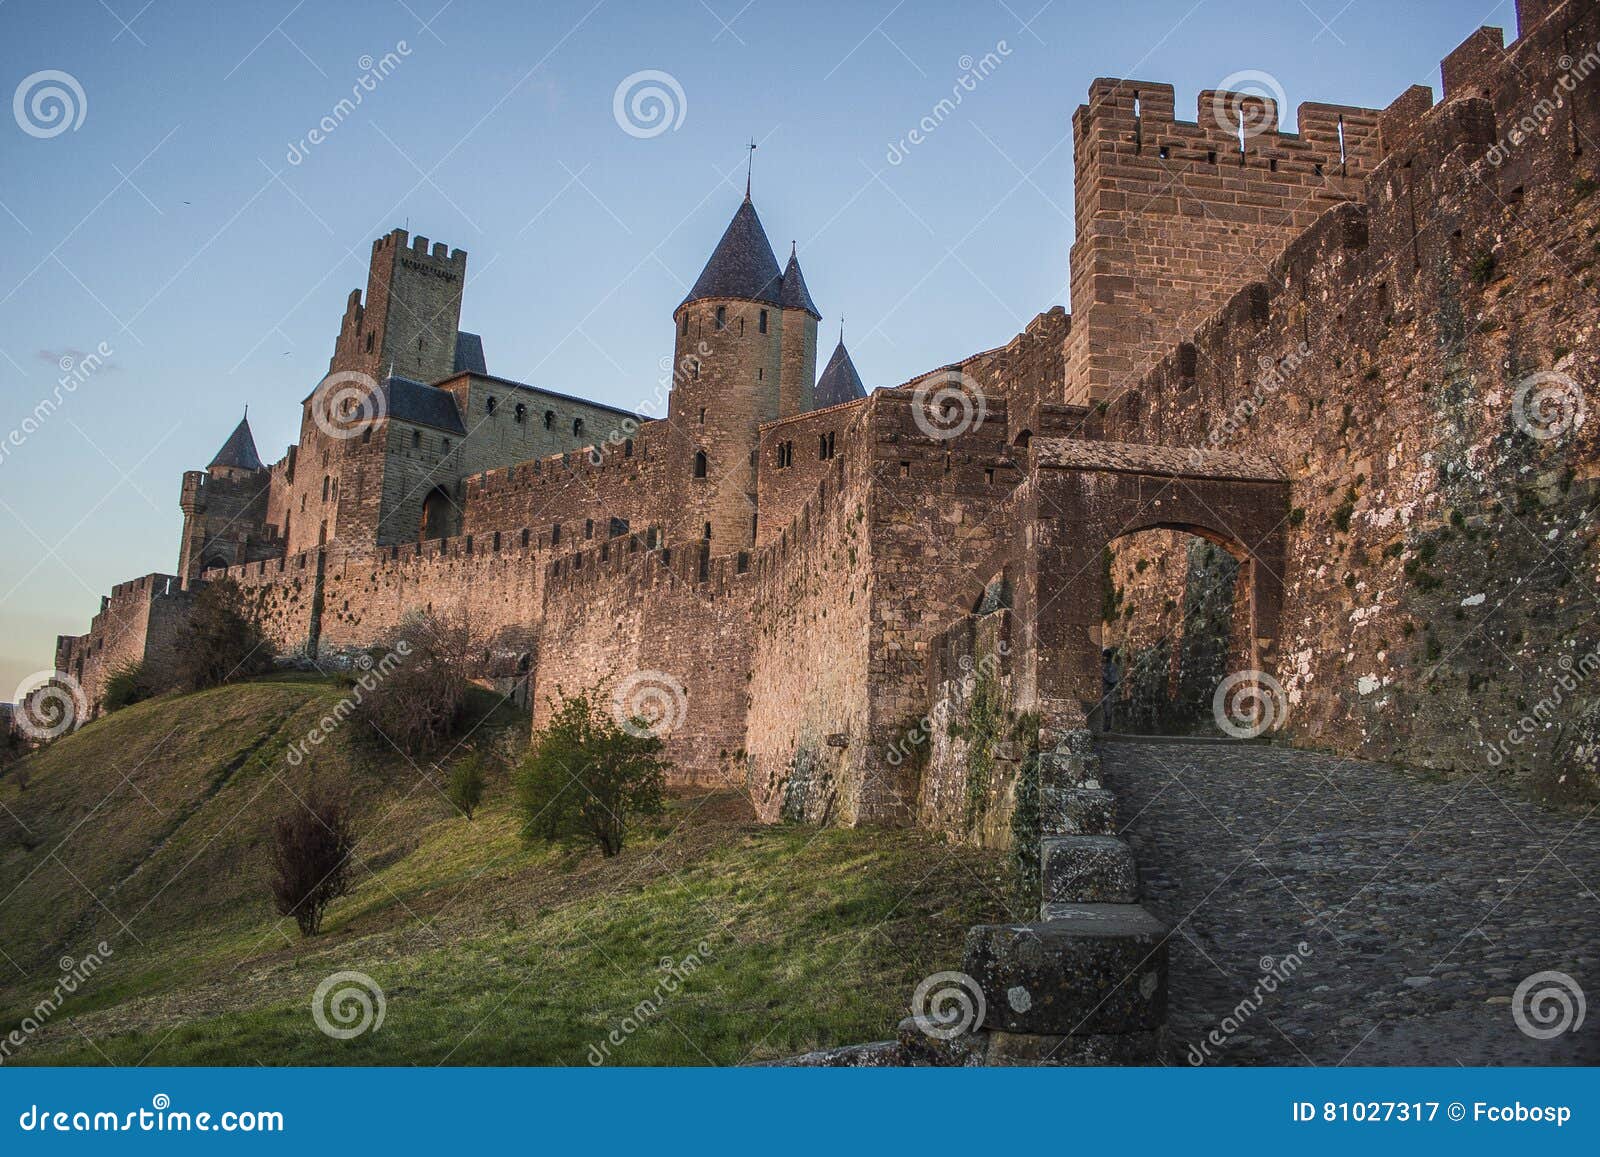 historic fortified city of carcassone, france